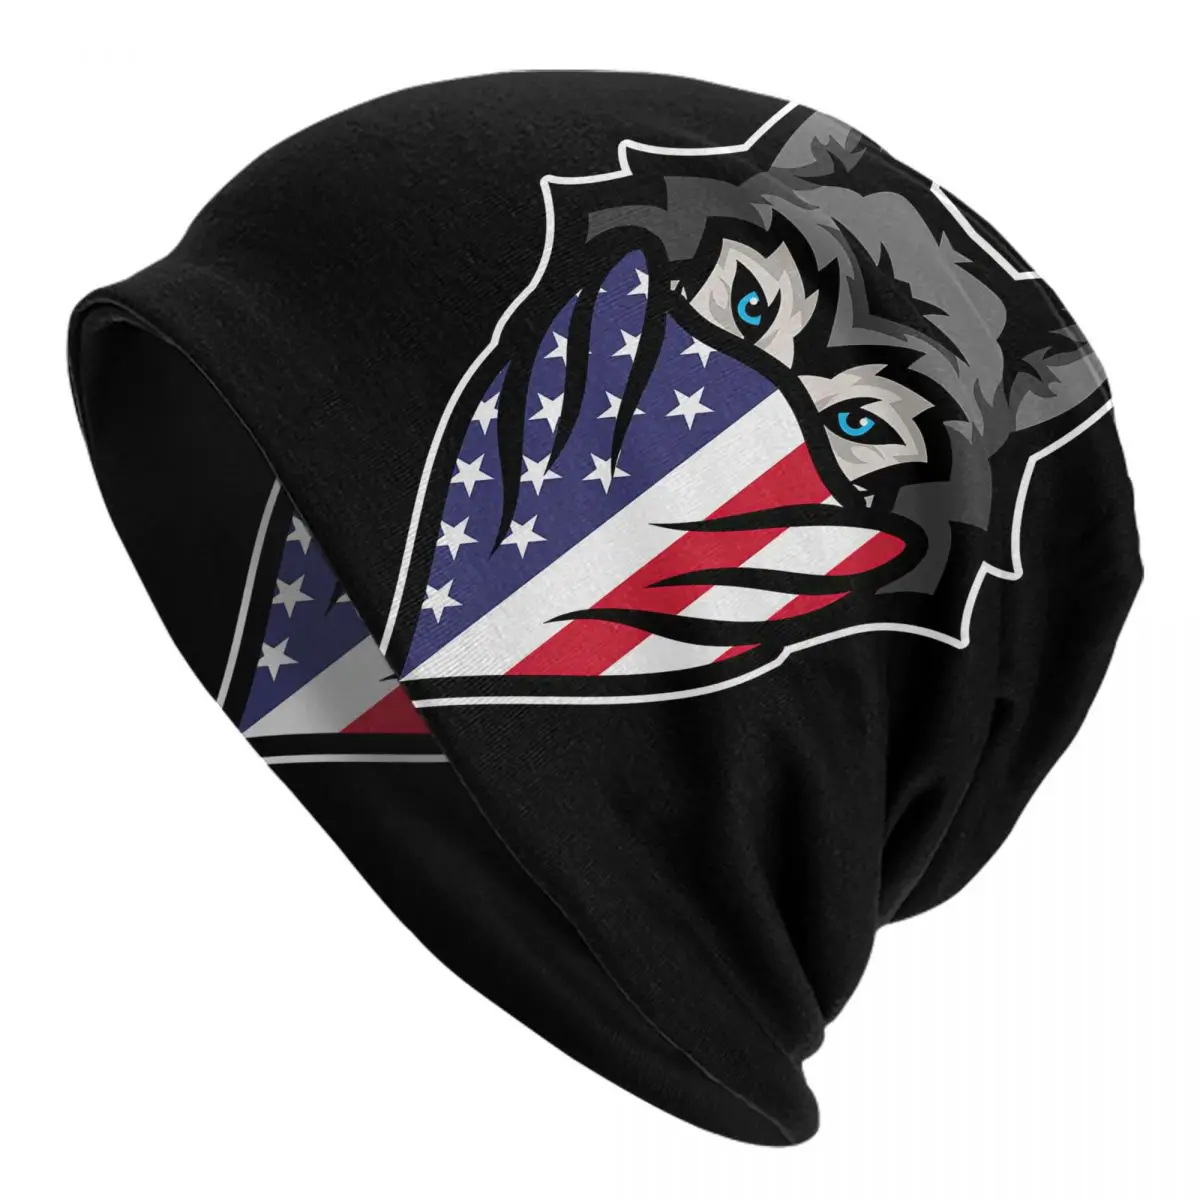 Siberian Husky US America Flag Wolf Dog Owner Pet Gift Adult Men's Women's Knit Hat Keep warm winter Funny knitted hat